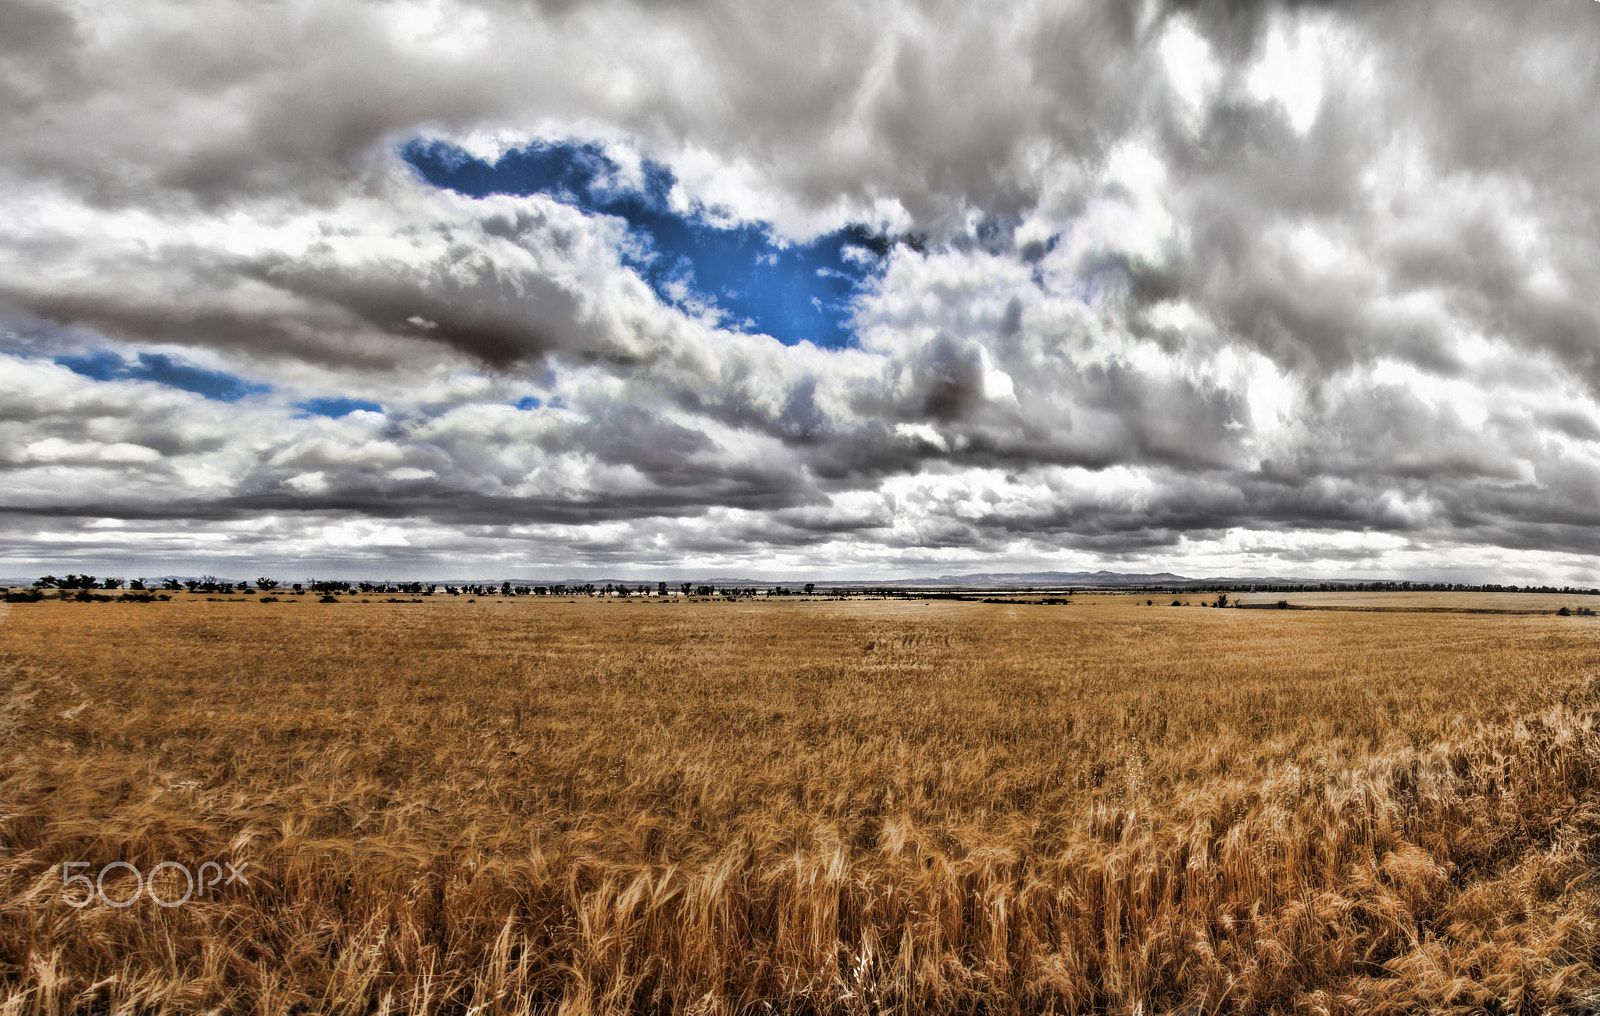 Canon EOS 6D + Sigma 24-105mm f/4 DG OS HSM | A sample photo. Barley field 1 photography